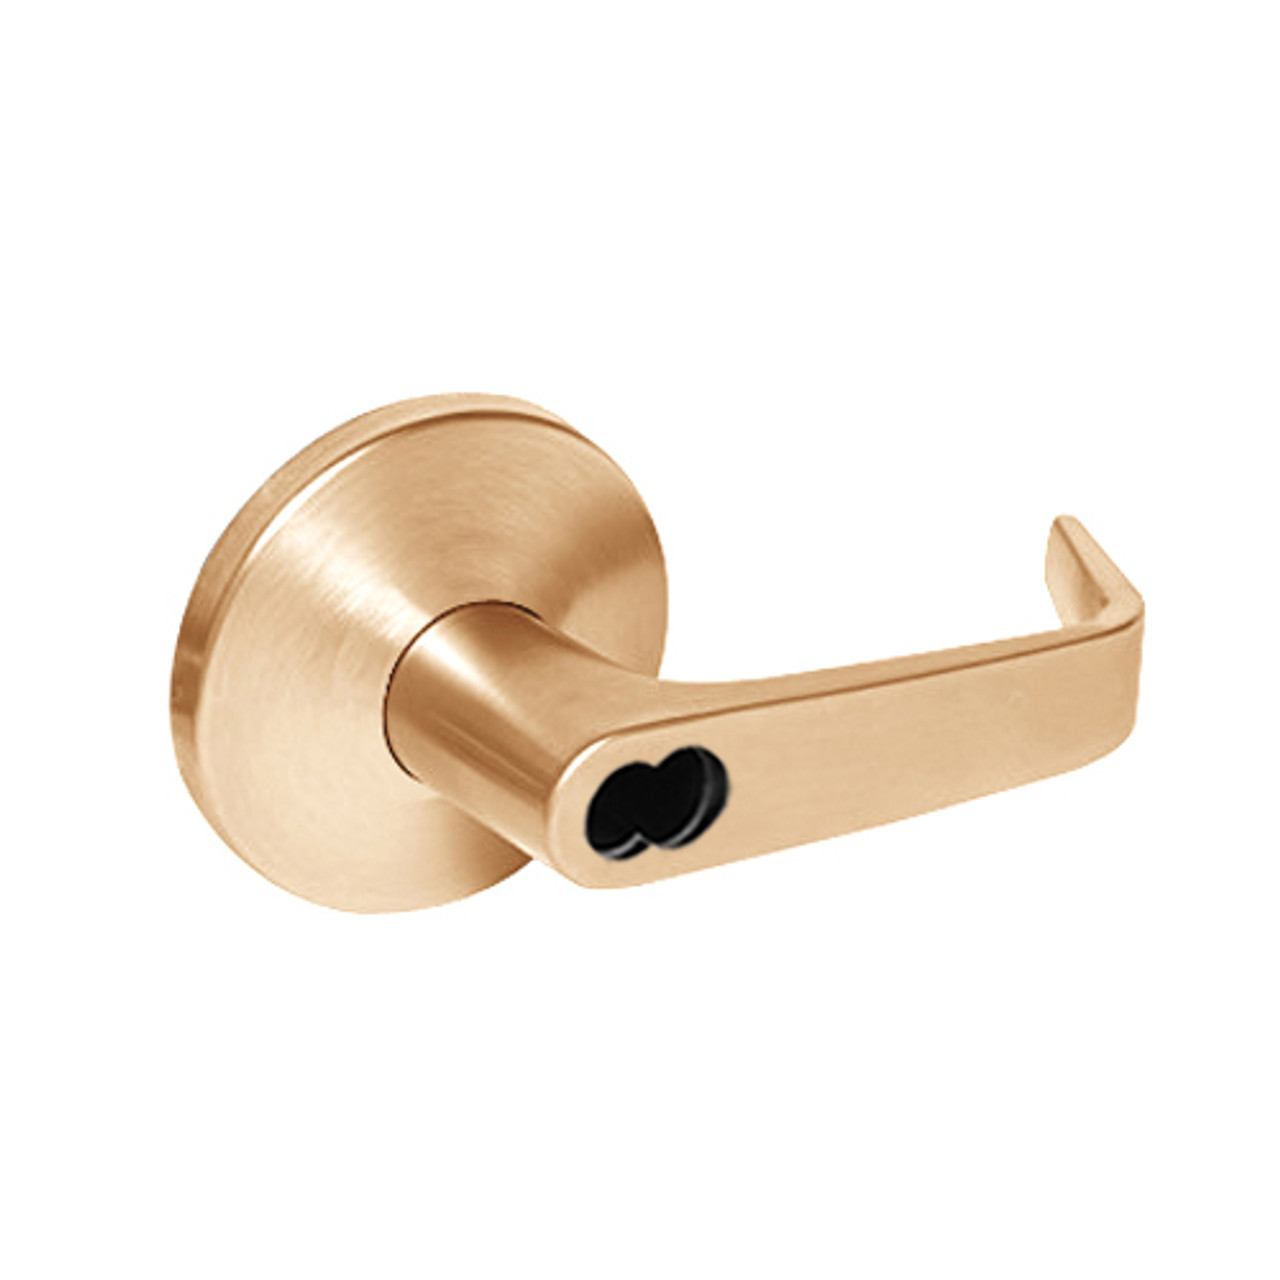 9K57W15LS3611 Best 9K Series Institutional Cylindrical Lever Locks with Contour Angle with Return Lever Design Accept 7 Pin Best Core in Bright Bronze